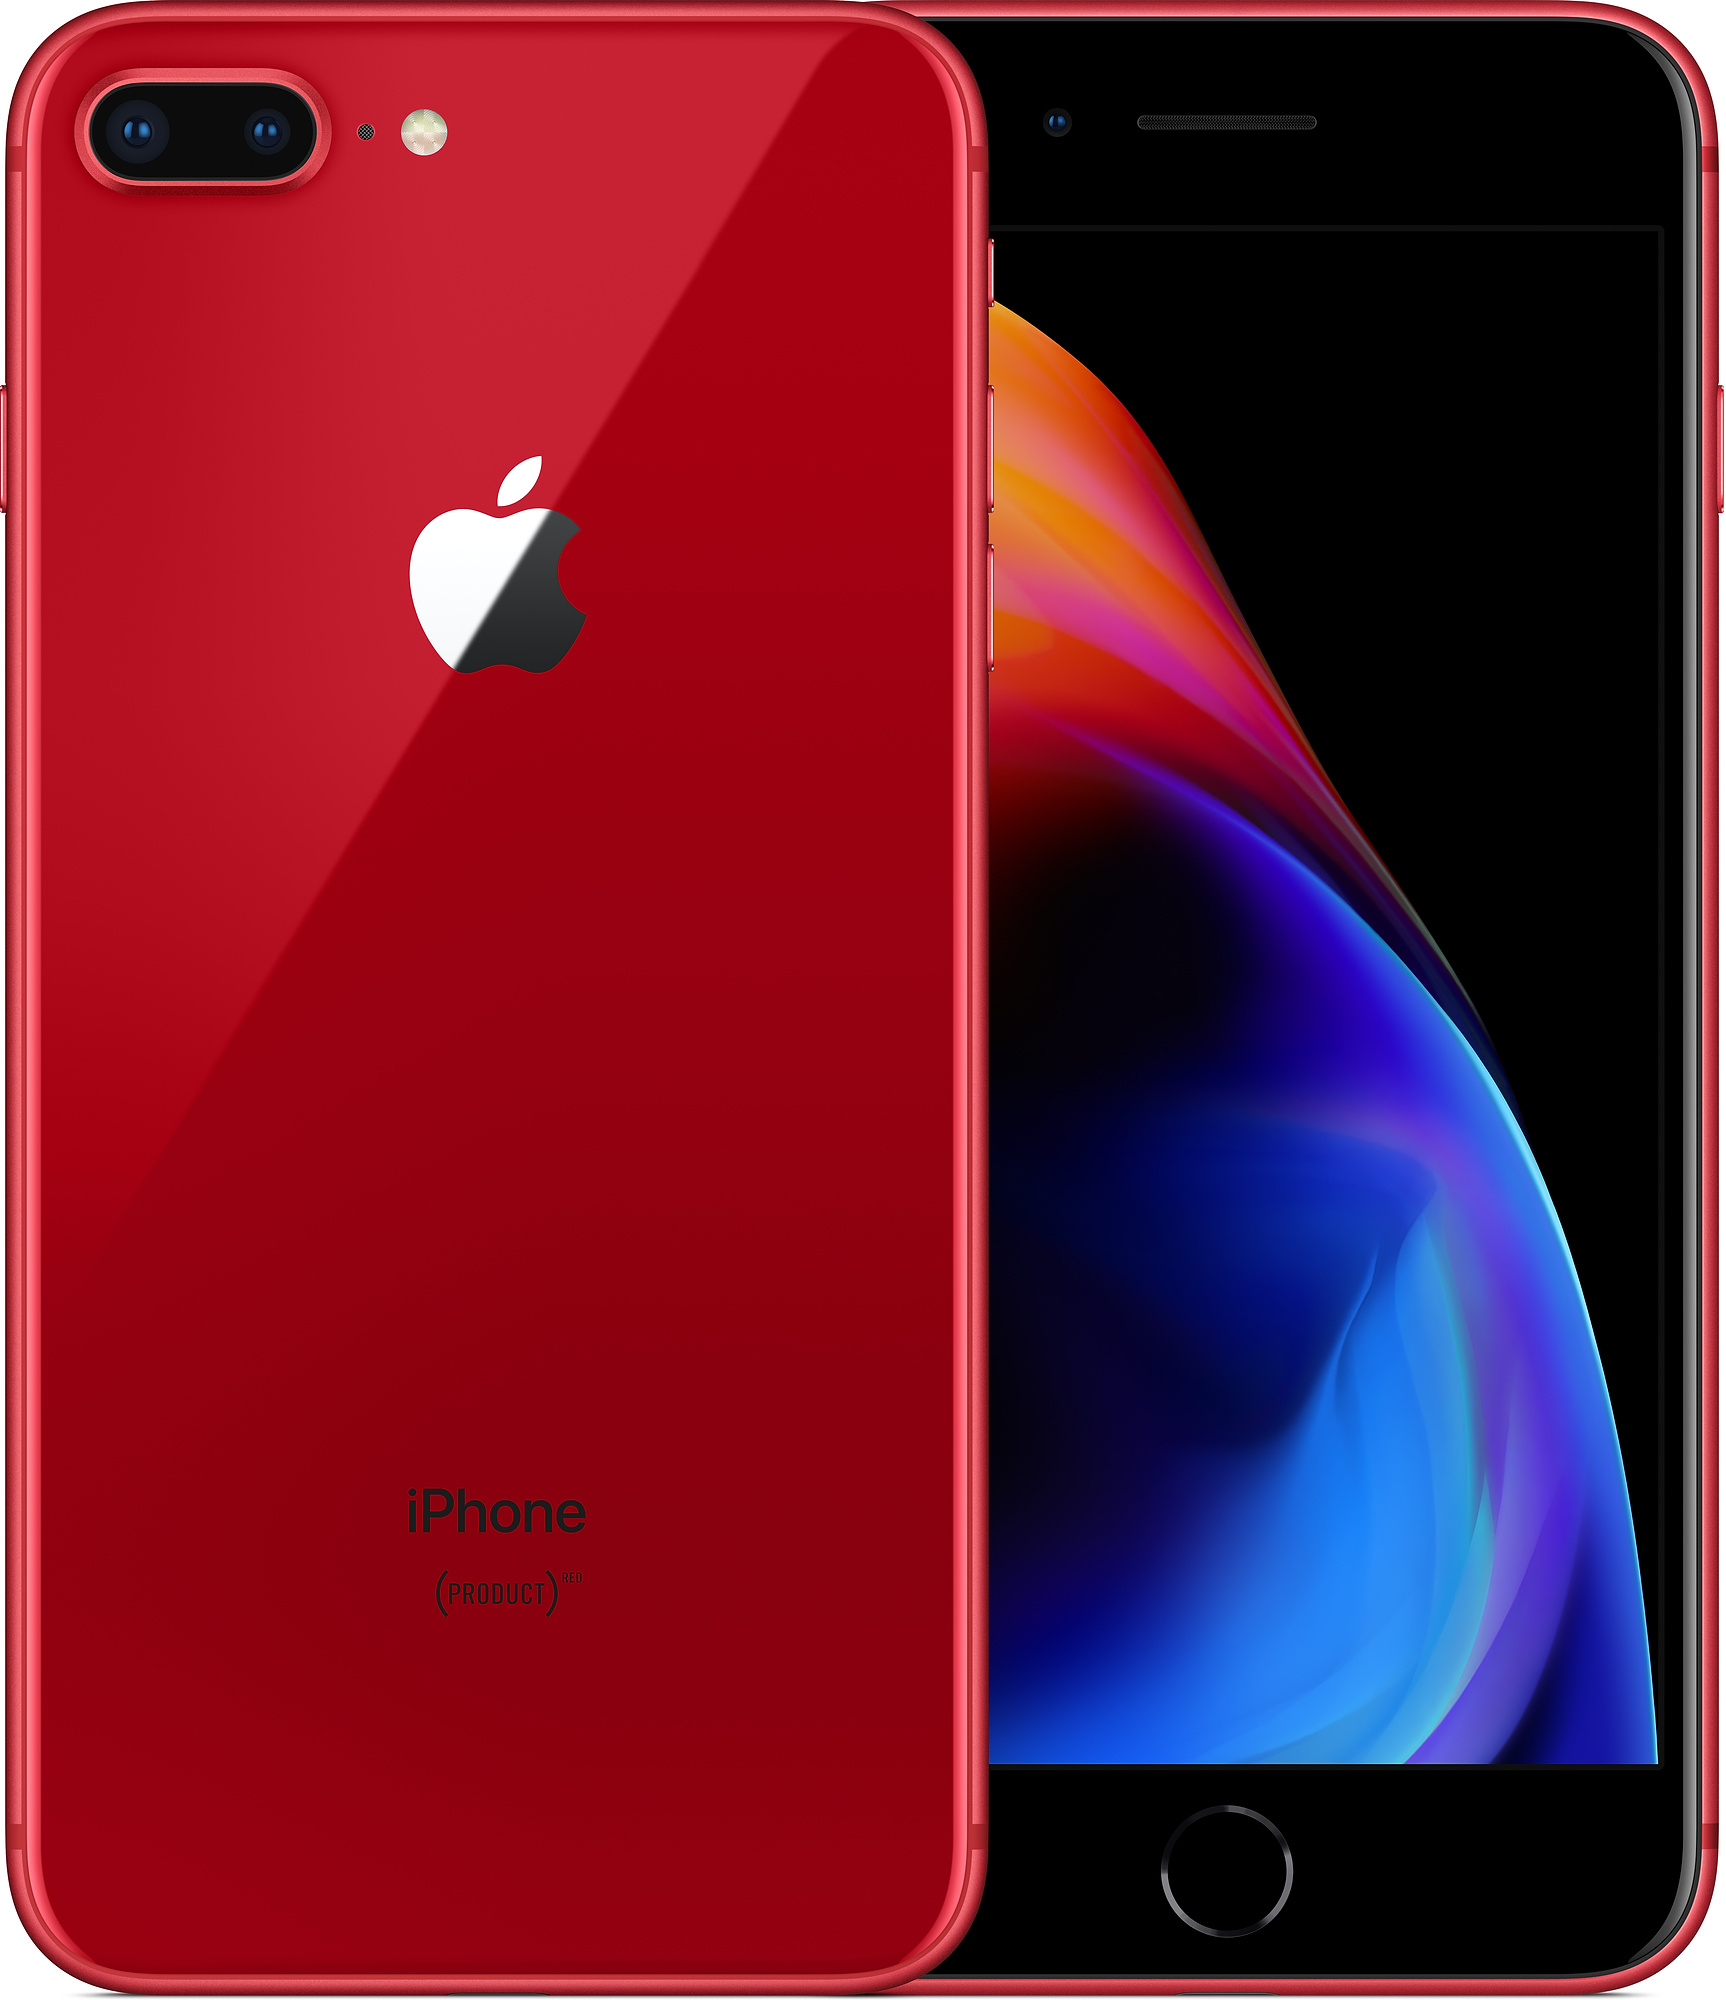 Apple iPhone 8 Plus 64GB (PRODUCT) Red LTE Cellular Sprint MRTJ2LL/A